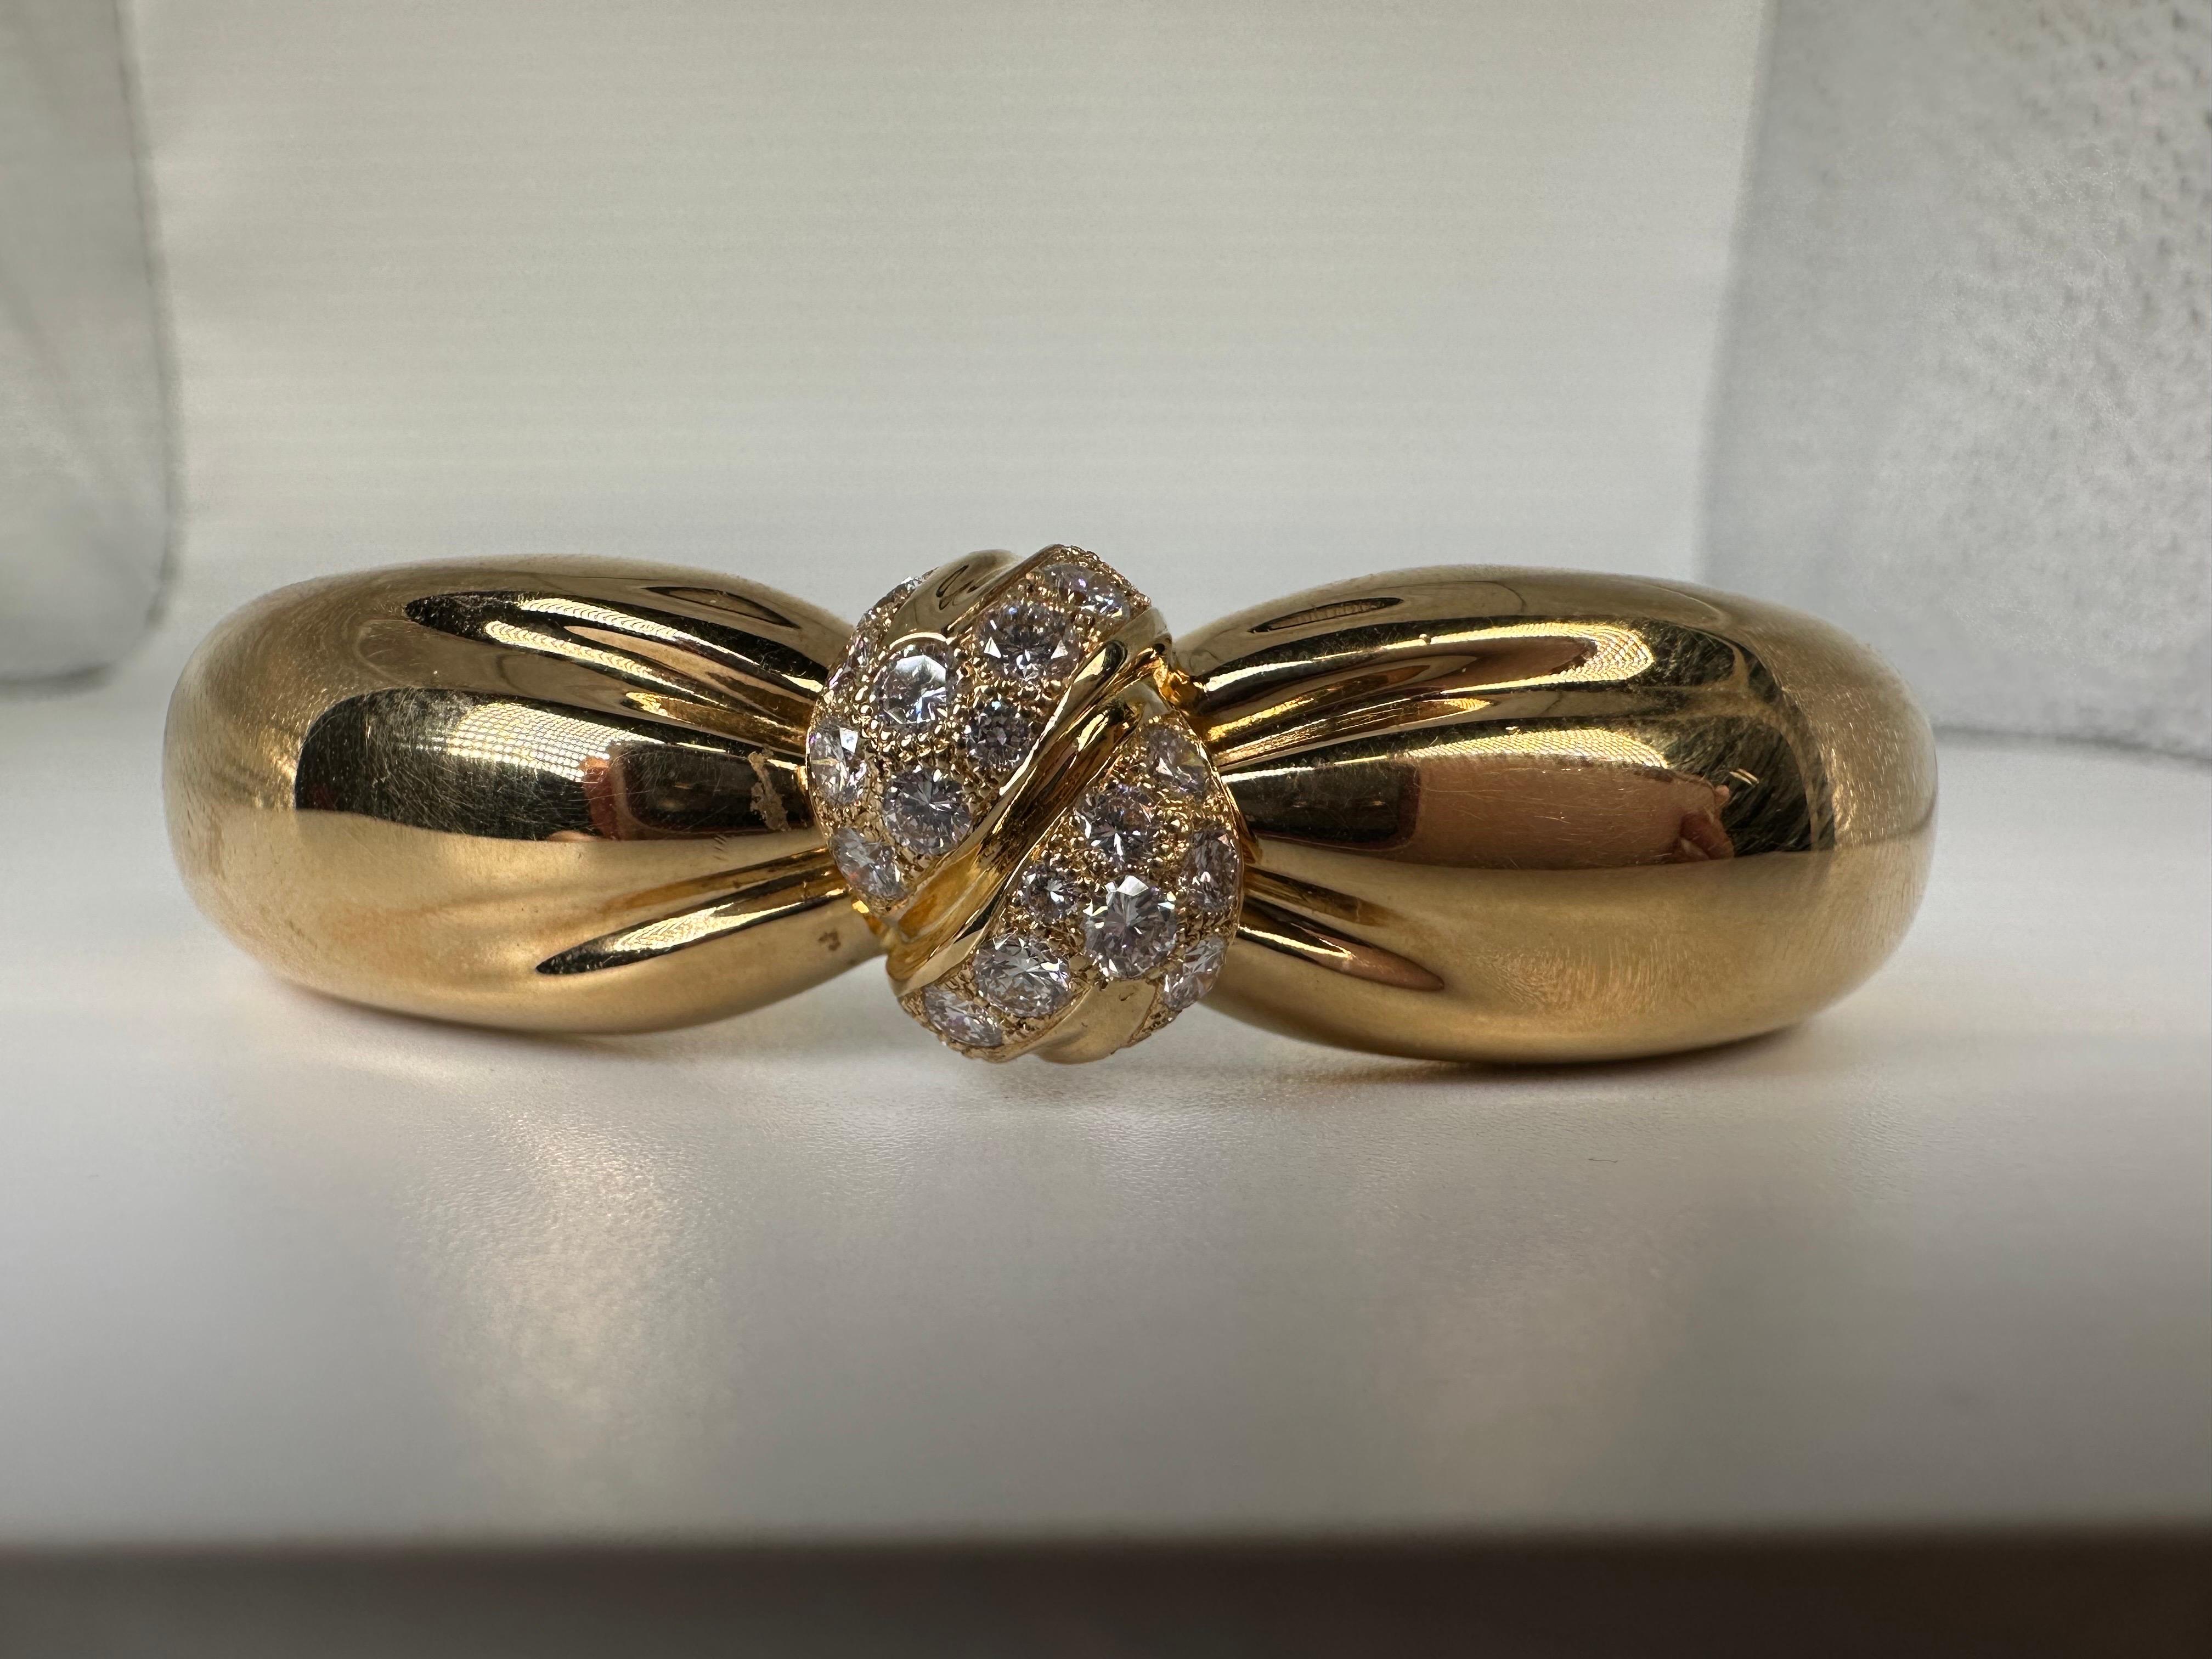 Rare find! Estate Van Cleef diamond bangle in 18KT yellow gold, immaculate condition!

METAL: 18KT
NATURAL DIAMOND(S)
Clarity/Color: VS/F-G
Cut: Round Brilliant
Carat:1.10ct
Grams:43.01
Item 17000097eoia


WHAT YOU GET AT STAMPAR JEWELERS:
Stampar